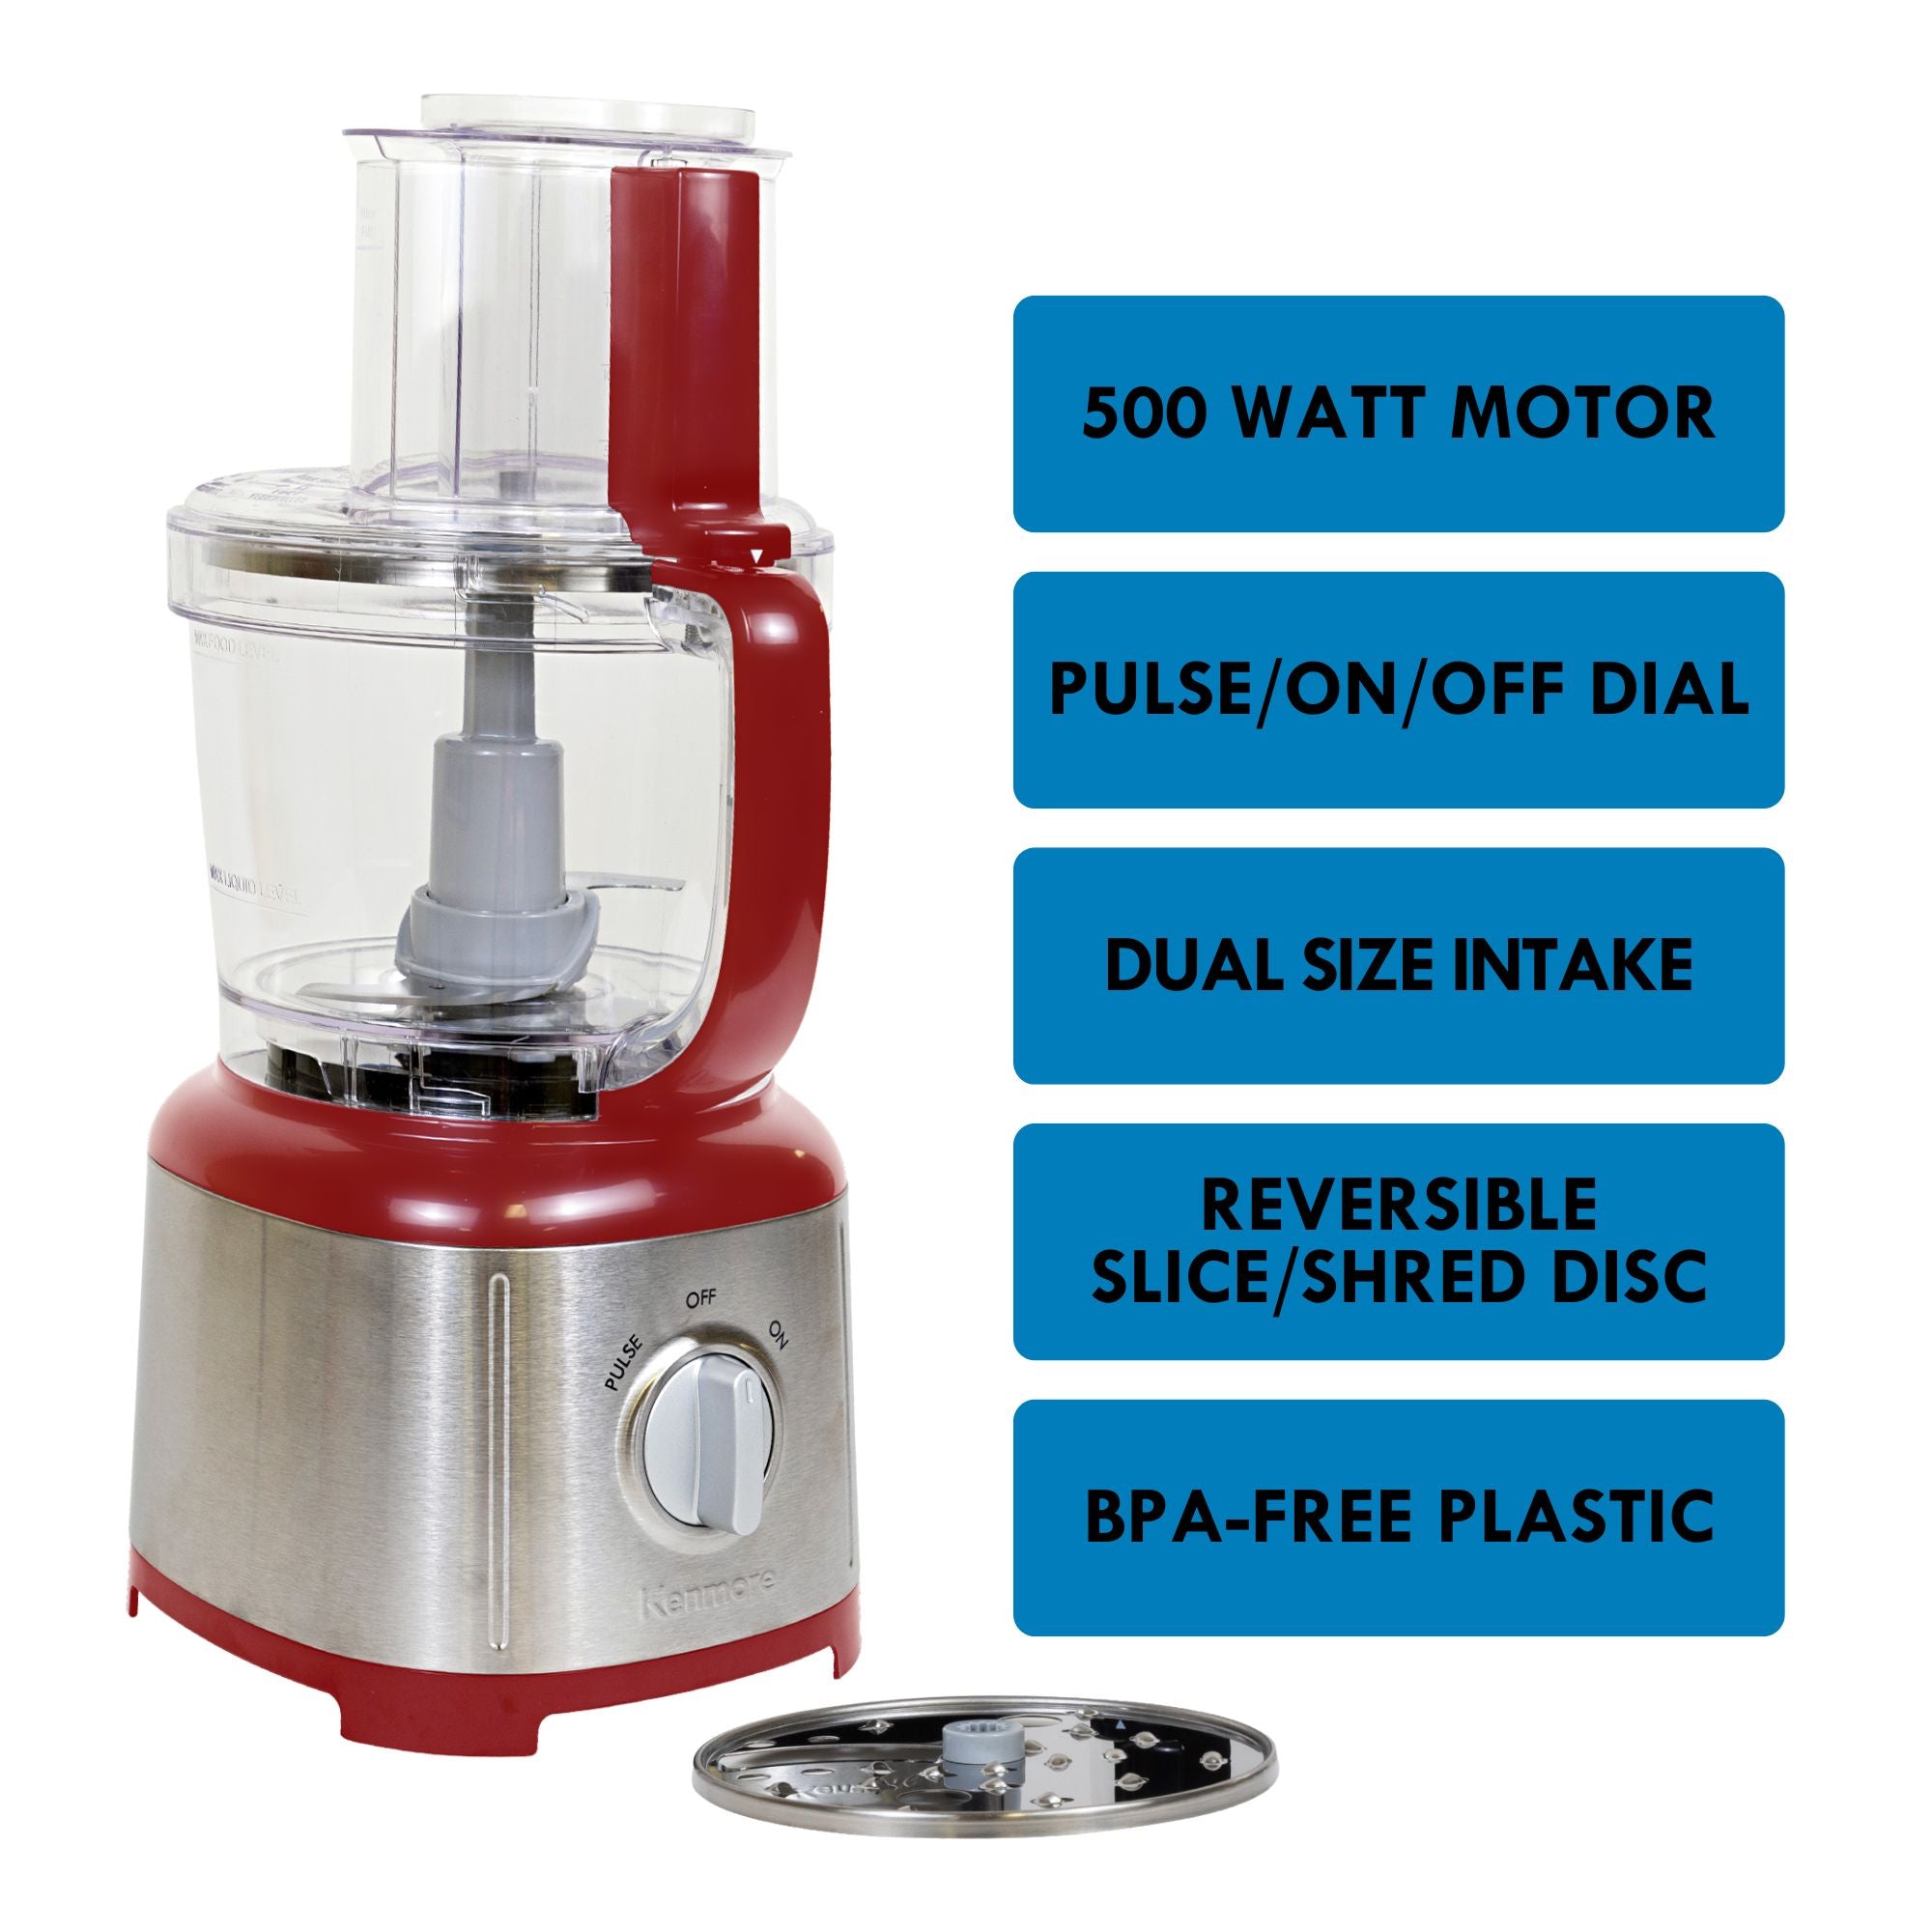 Kenmore 11 cup food processor and vegetable chopper on a white background on the left with a list of features to the right: 500 watt motor; pulse/on/off dial; dual size intake; slice/shred disc; BPA free plastic